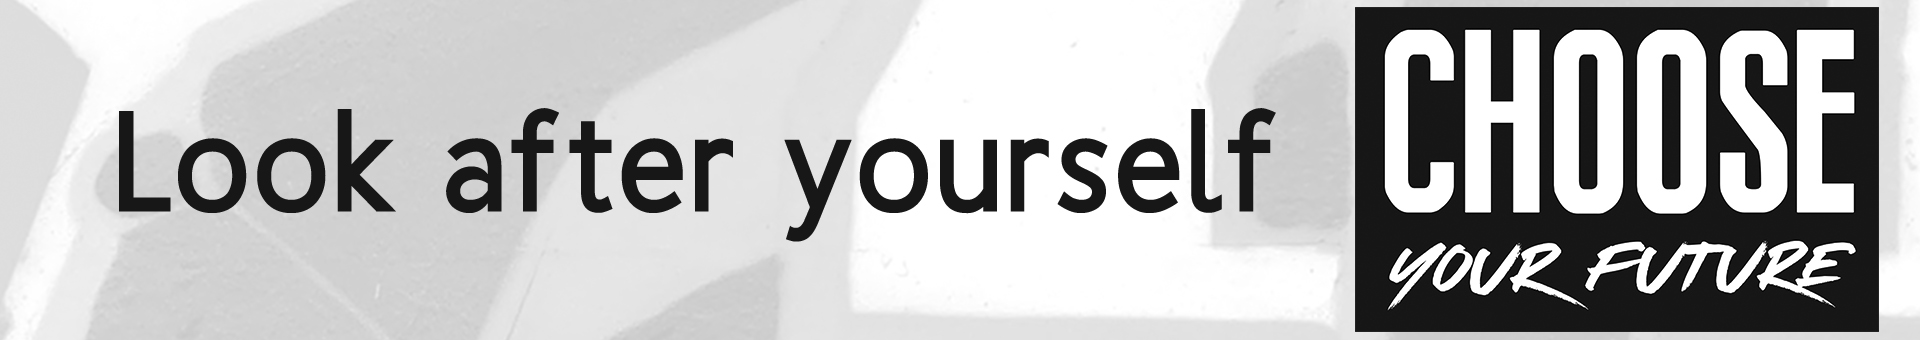 Look after yourself banner